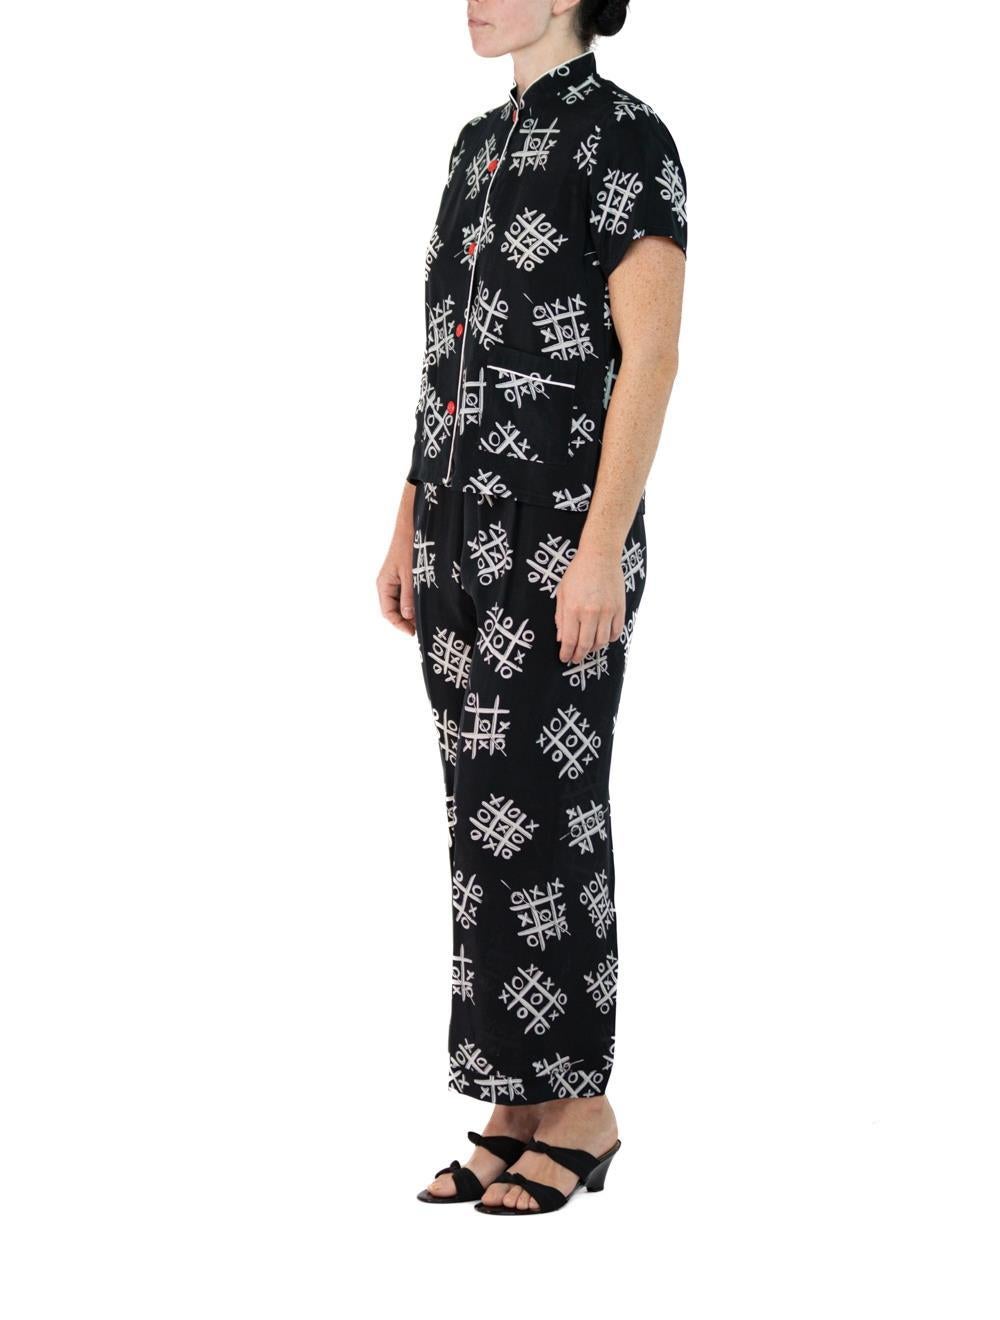 Morphew Collection Black & White Tic Tac Toe Novelty Print Cold Rayon Bias Pajamas Master Medium
MORPHEW COLLECTION is made entirely by hand in our NYC Ateliér of rare antique materials sourced from around the globe. Our sustainable vintage